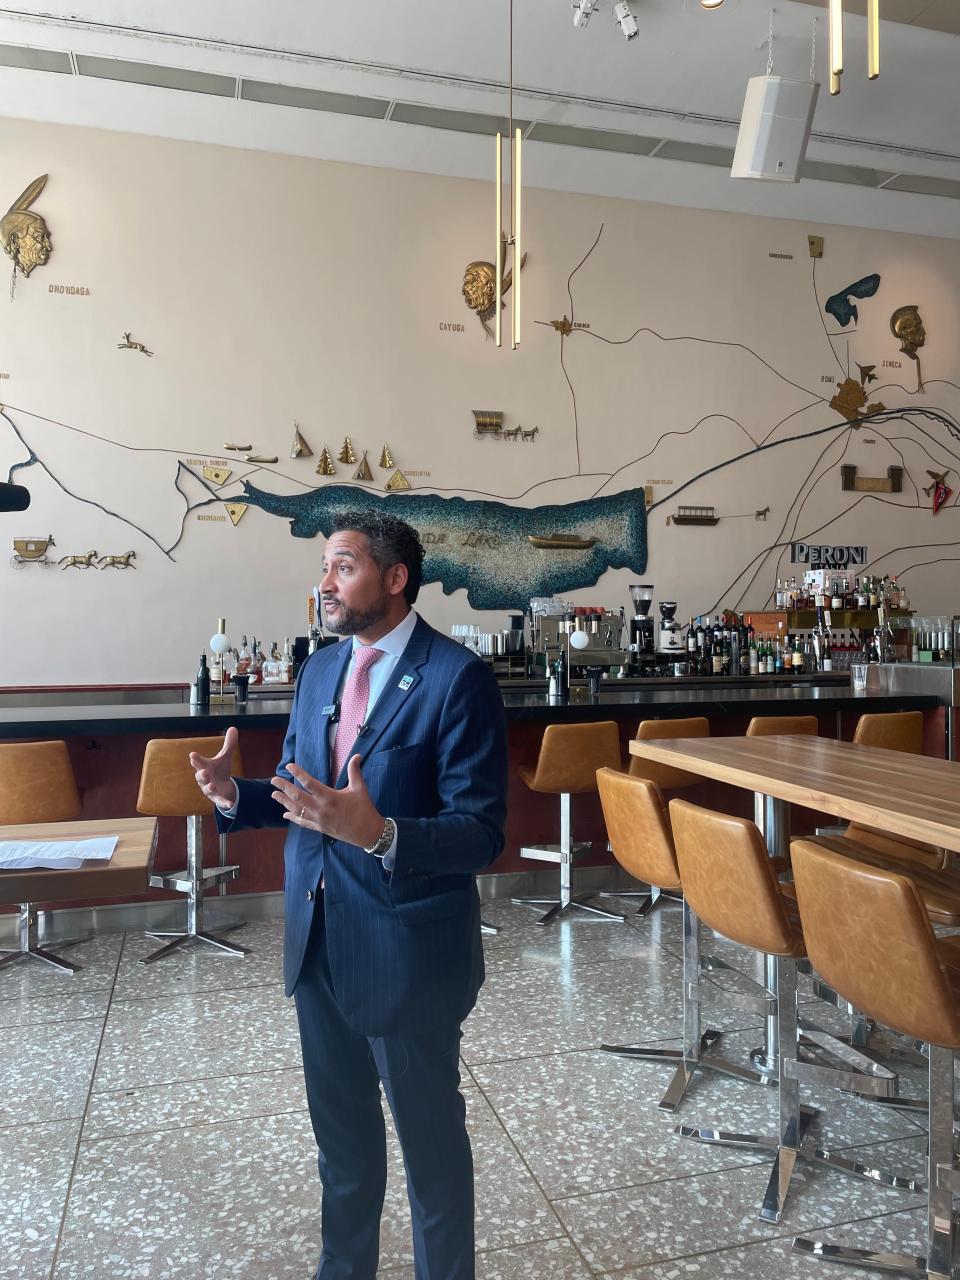 New York Secretary of State Robert J. Rodriguez visits Nostro Restobar and Lounge, one of the businesses now housed in the former Oneida National Bank building.